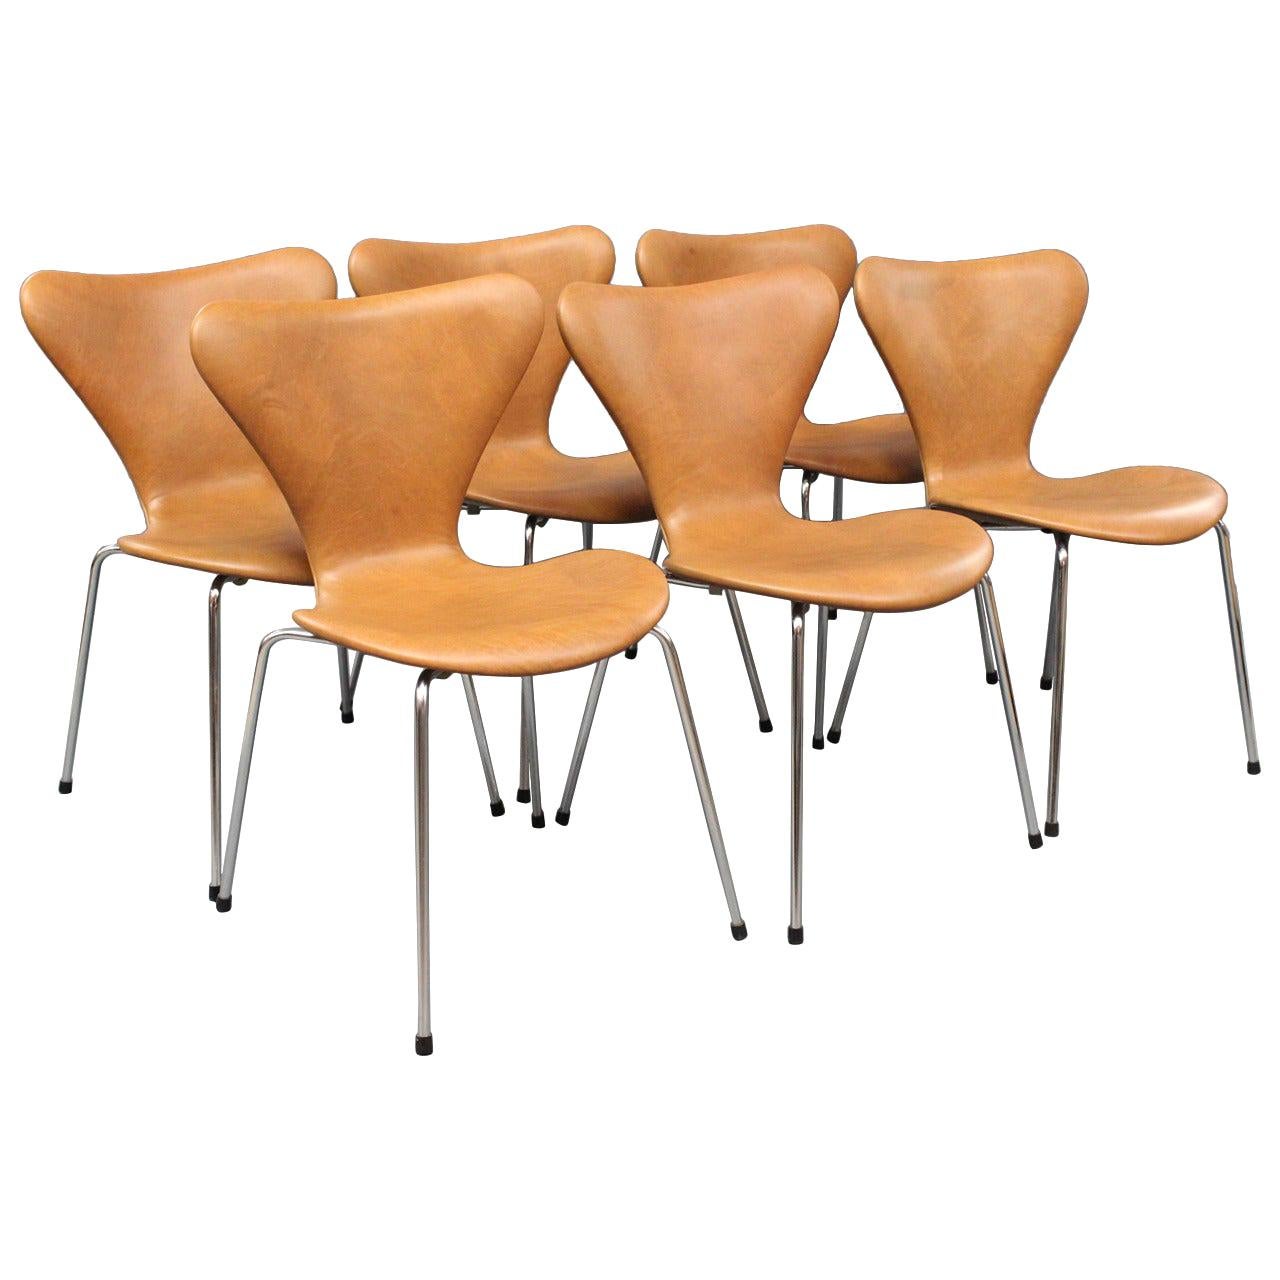 Chairs by Arne Jacobsen Model 3107 with Leather, 1980